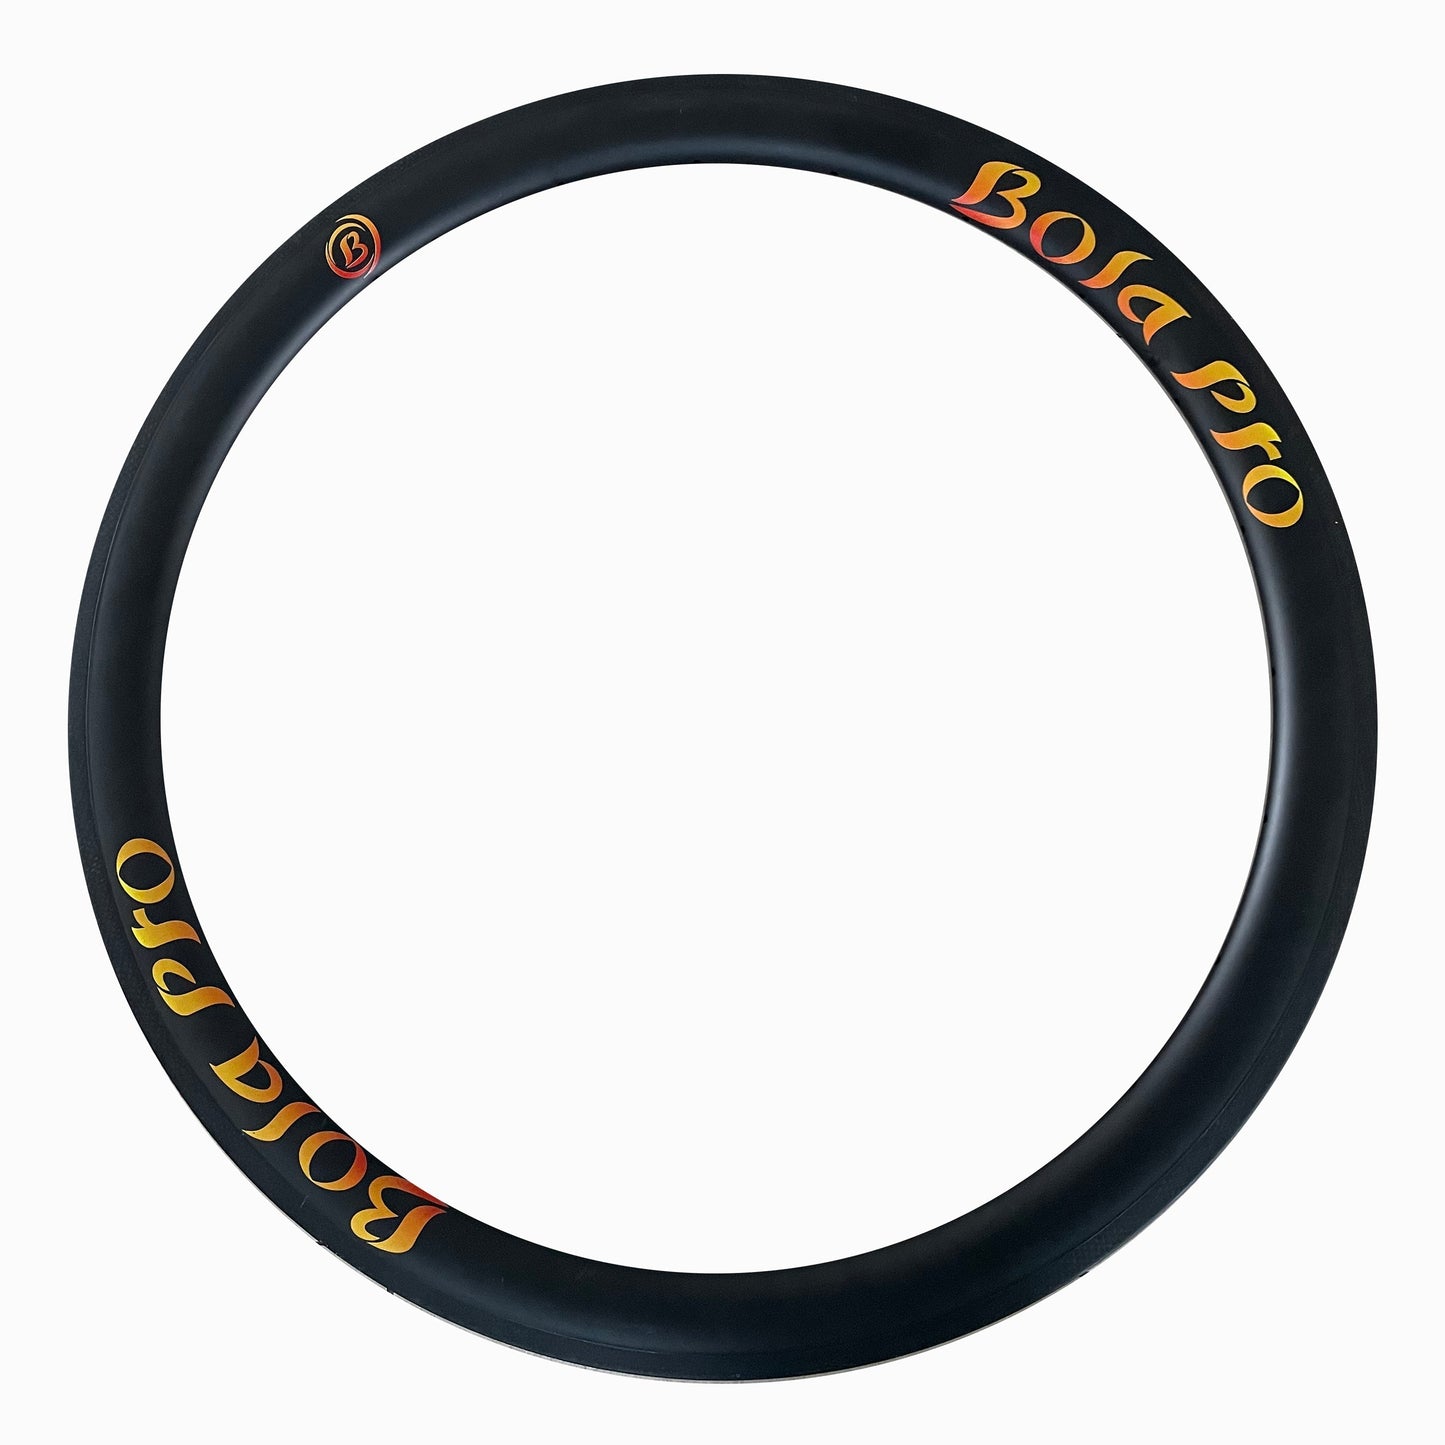 Clincher 700C carbon road bike rim 50mm profile  25mm outer wide 18mm inner wide